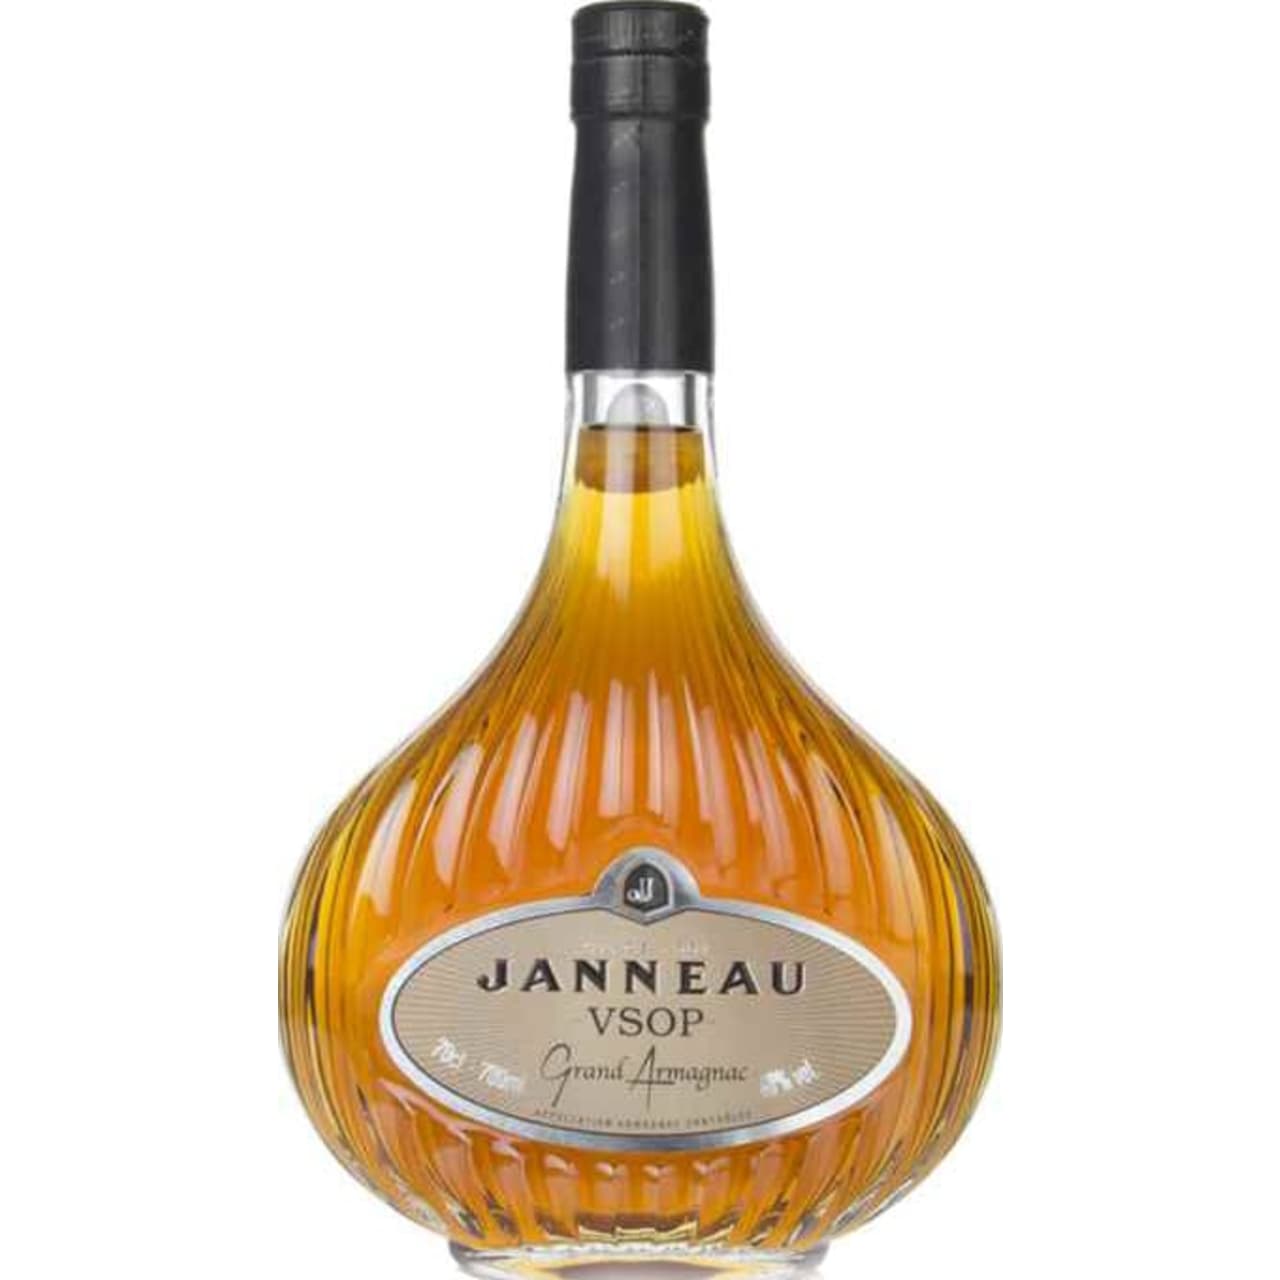 An elegant blend of Armagnacs aged for at least 7 years in Montlezun oak casks, which imparts a deep, full-bodied flavour with an aromatic oaky quality that opens up nicely after pouring.